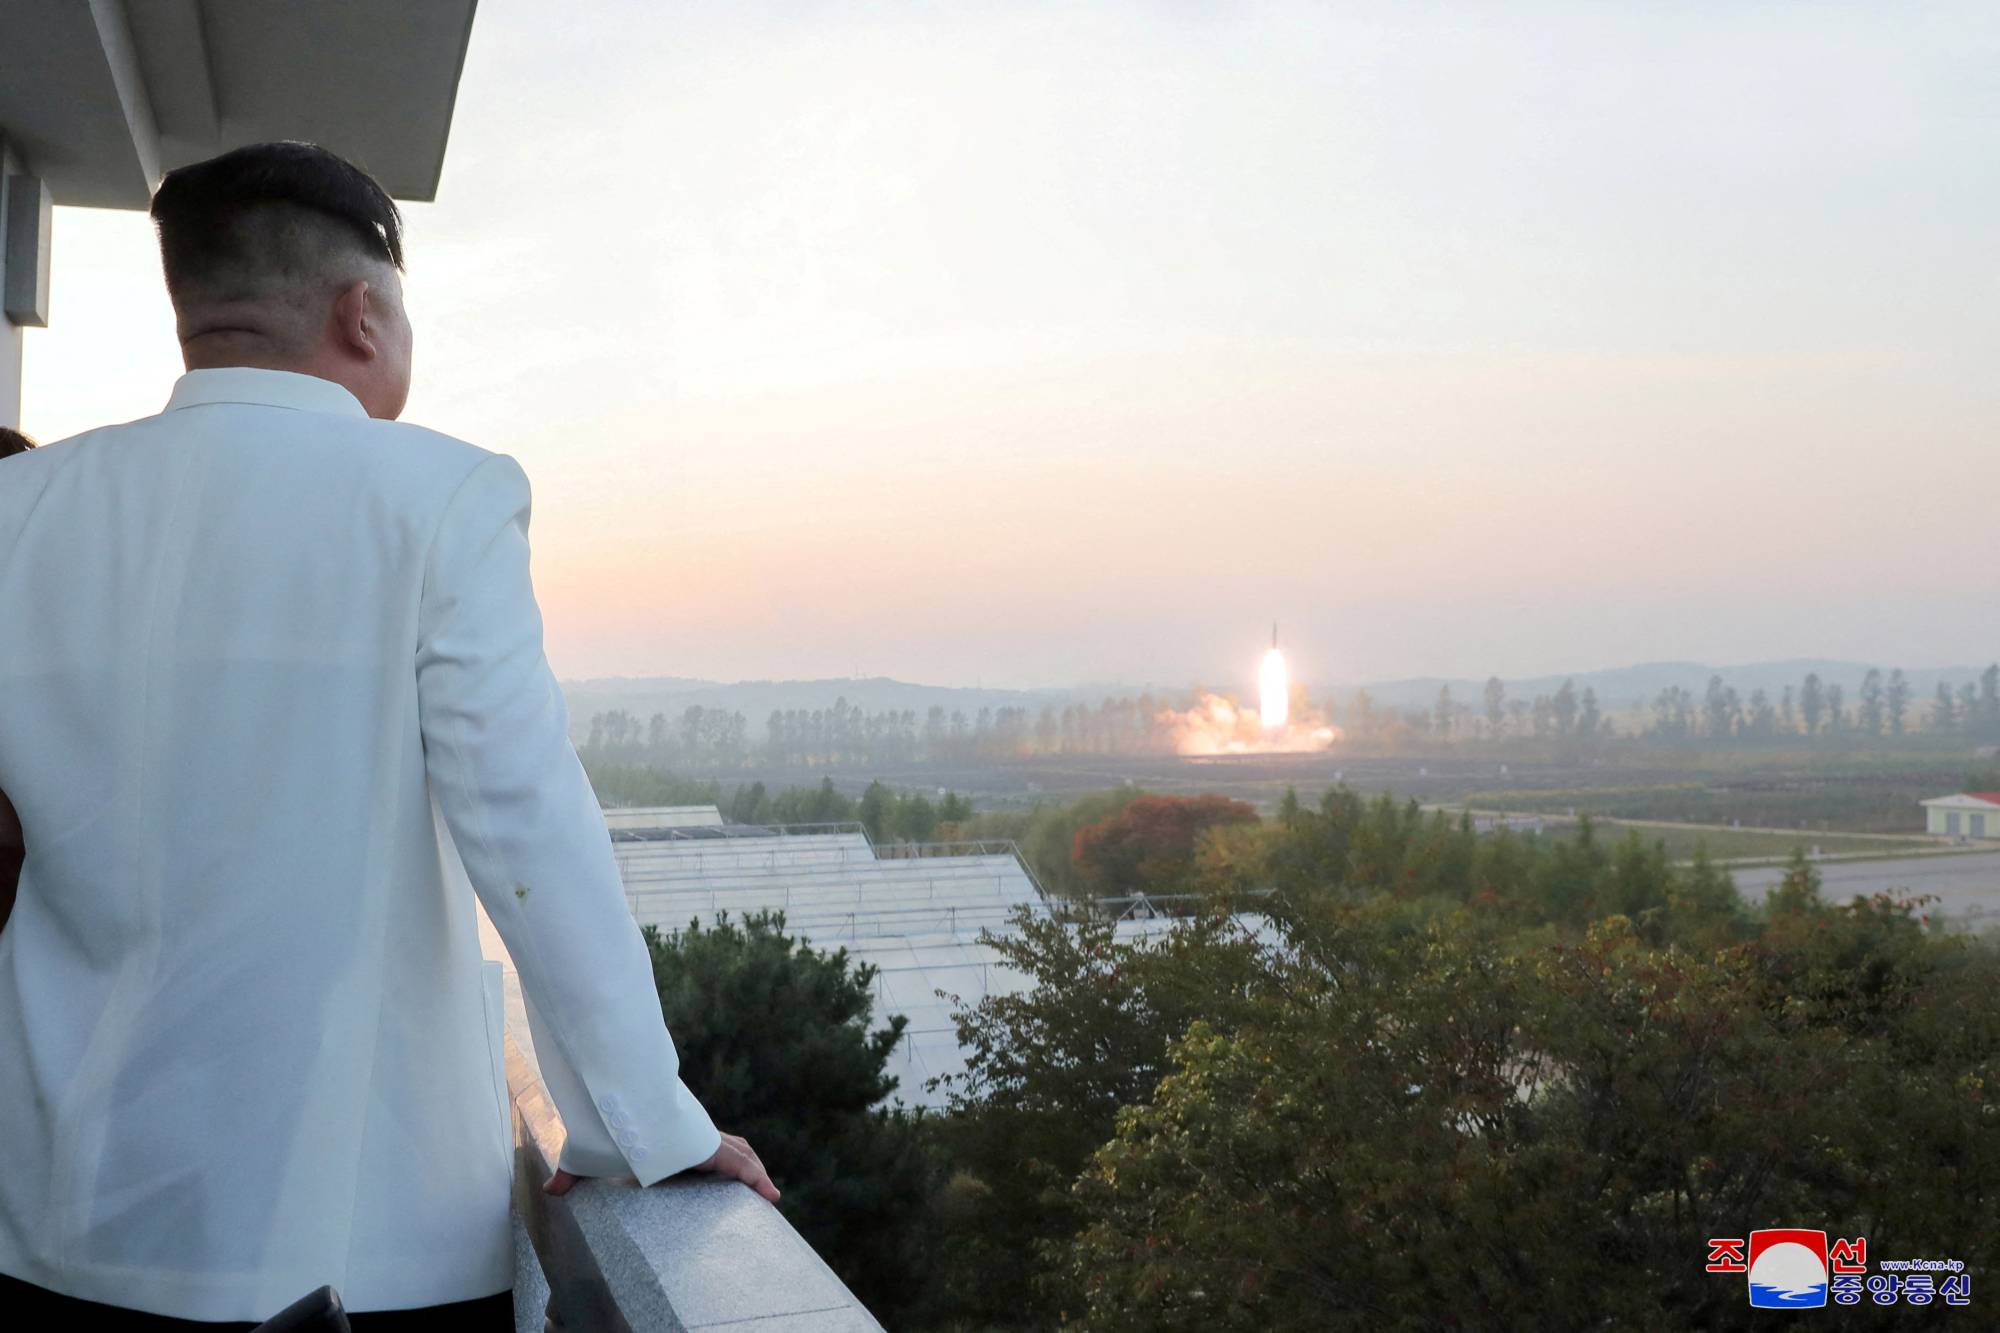 North Korean leader Kim Jong Un oversees a missile launch at an undisclosed location in the country in this photo released Monday. | KCNA / VIA REUTERS    